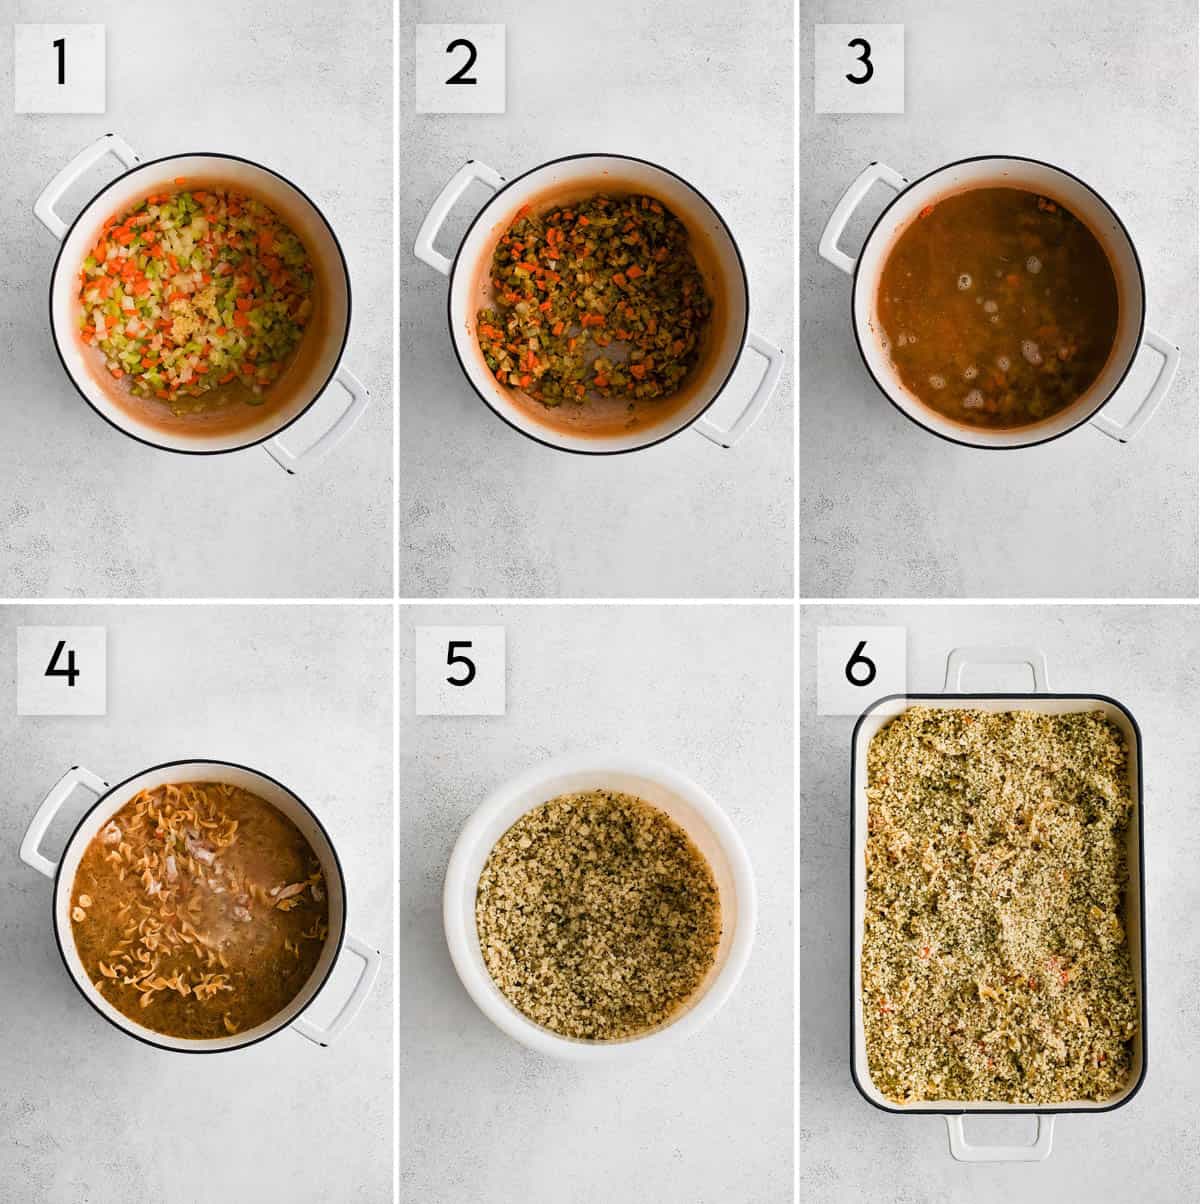 six image collage depicting the stages of preparing chicken noodle casserole